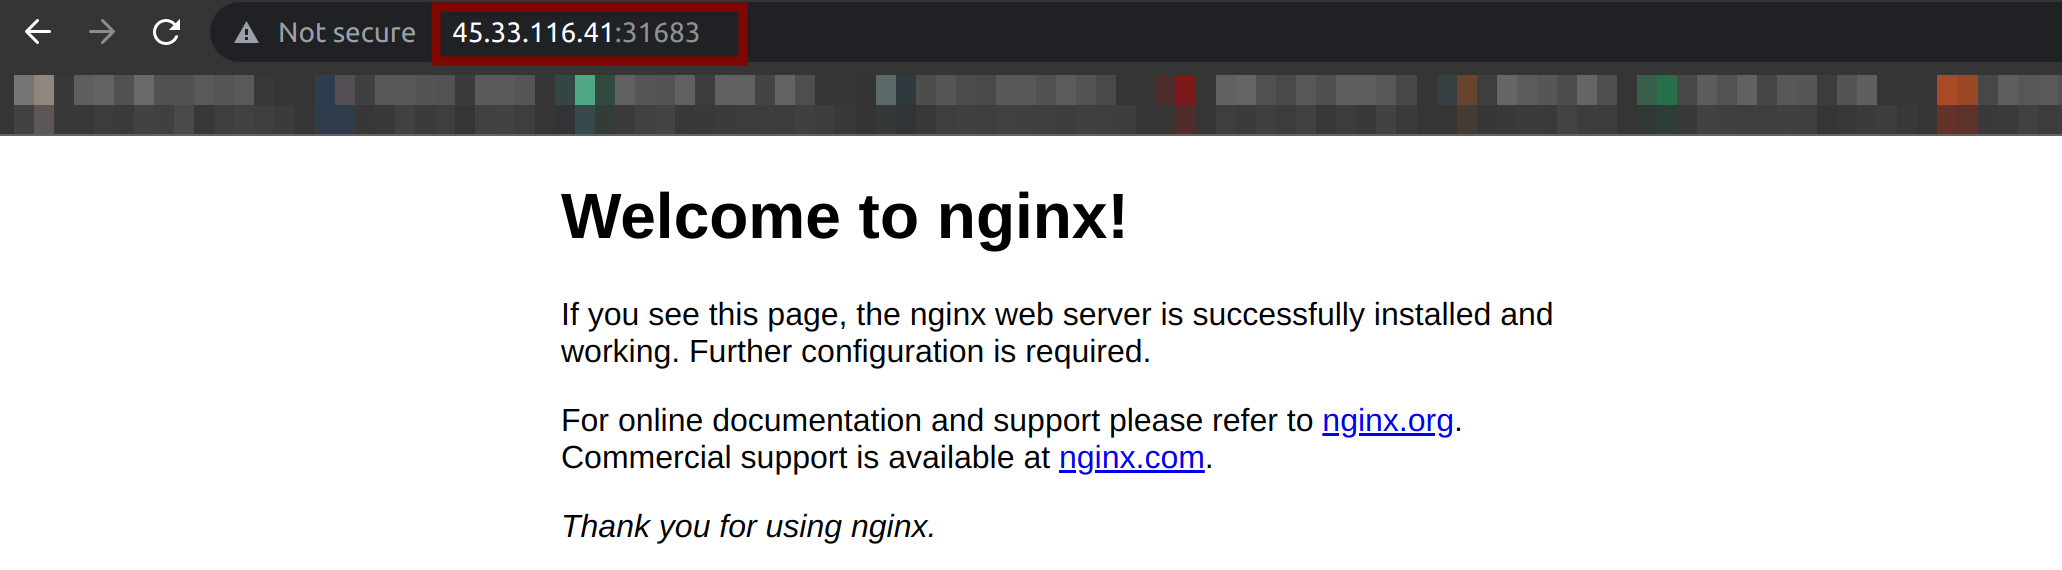 Viewing the NGINX welcome page from the master node